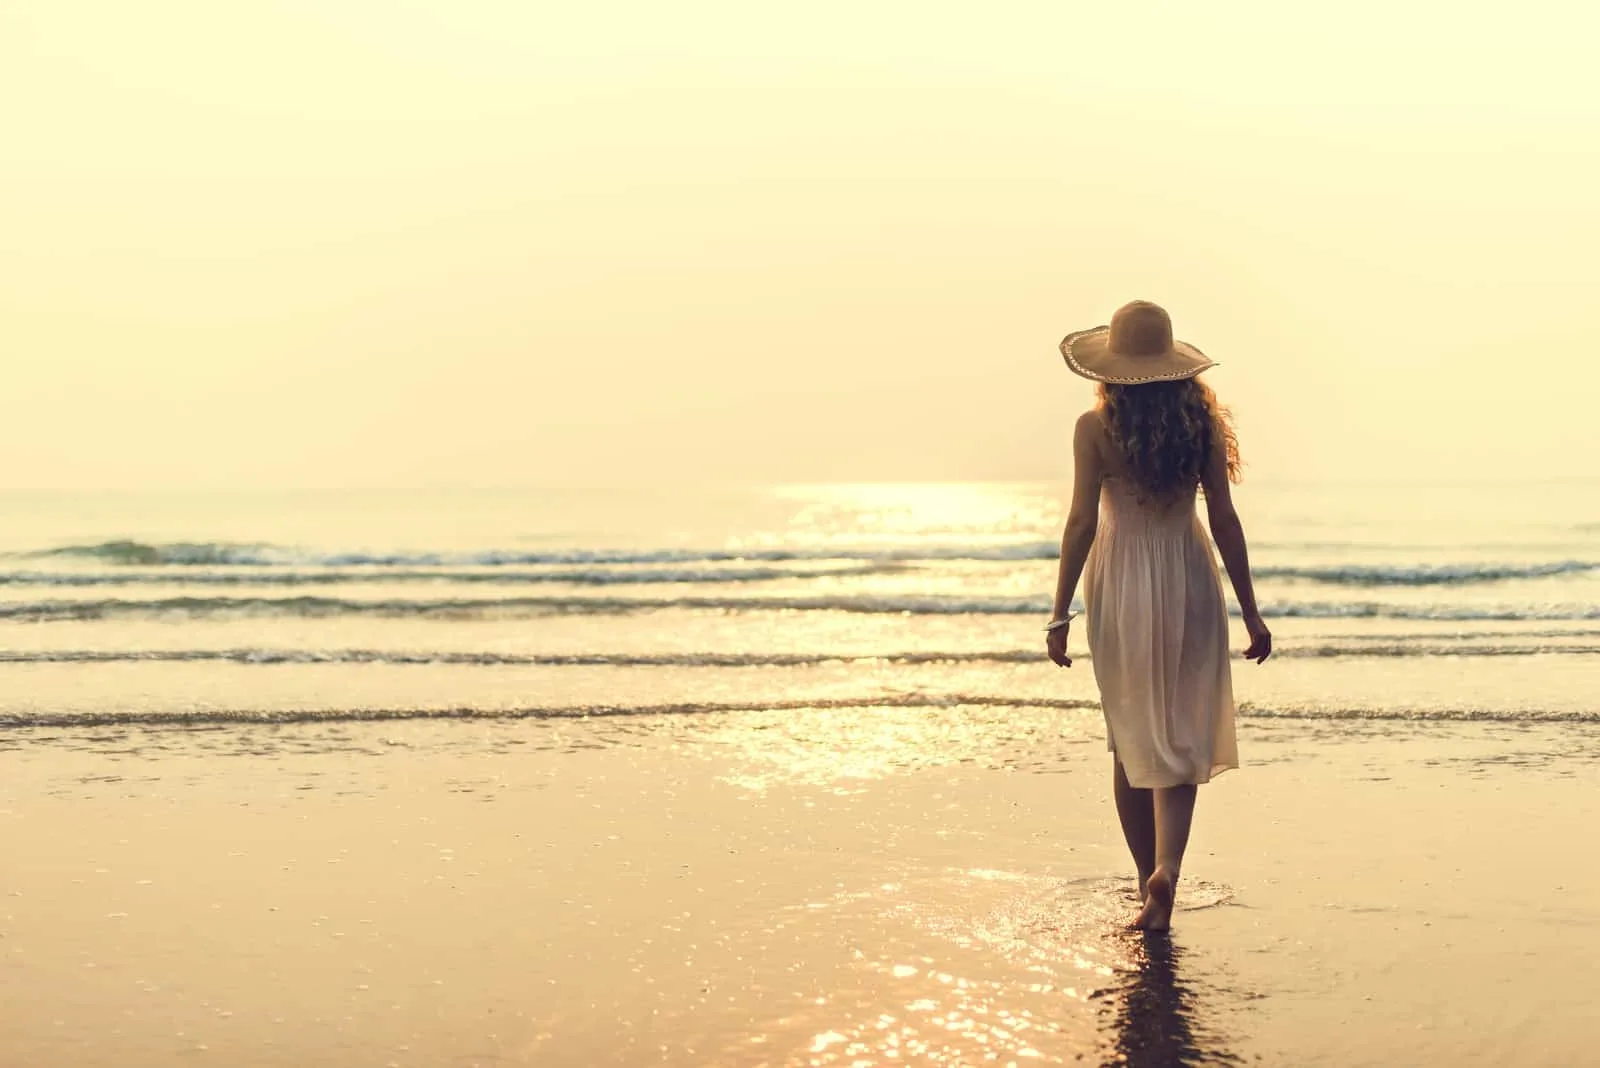 at sunset a barefoot woman in a white dress walks along the beach